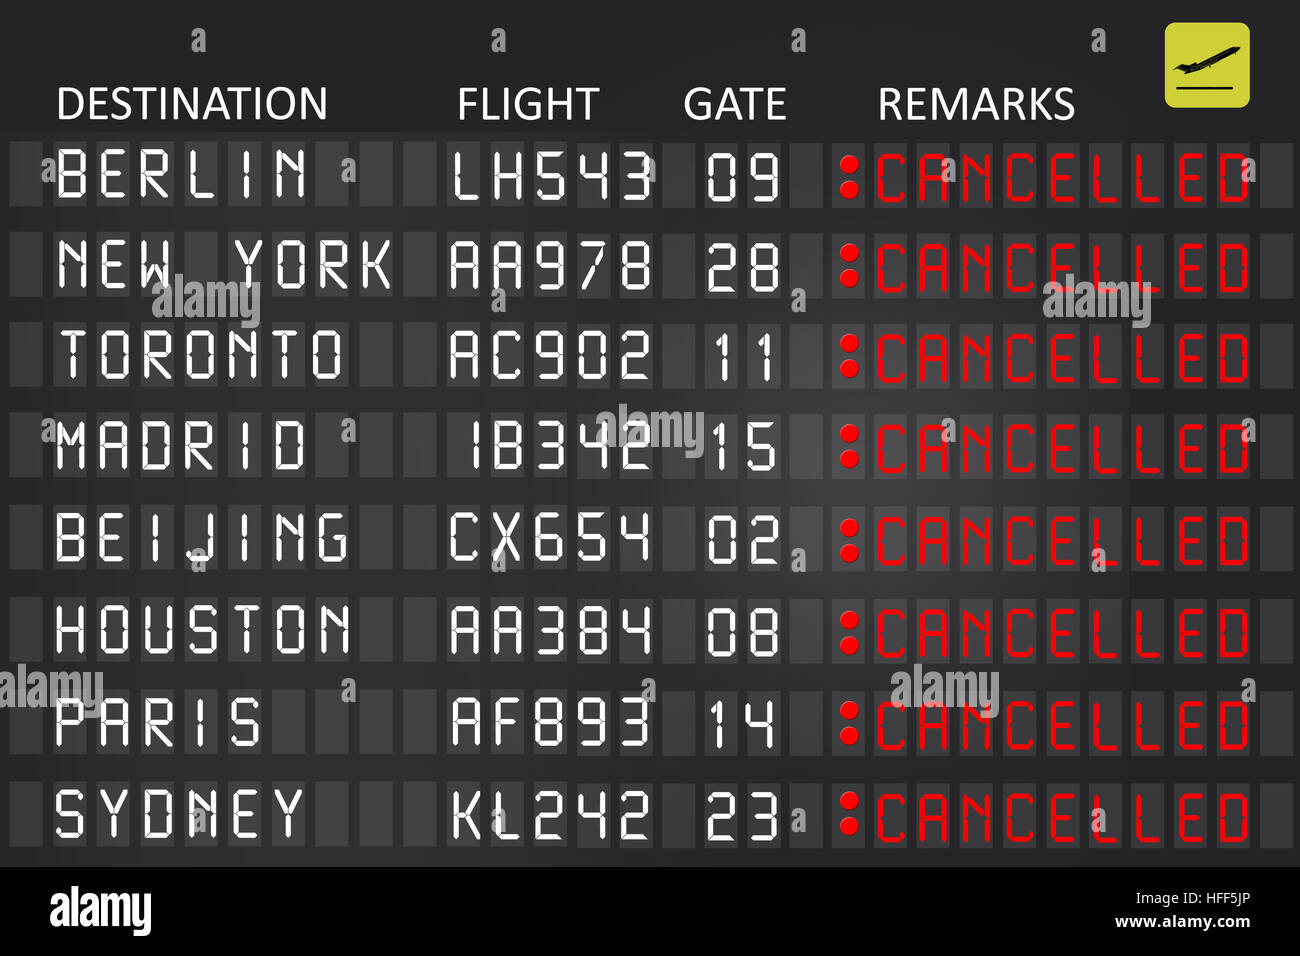 Airport billboard panel with cancelled flights Stock Photo